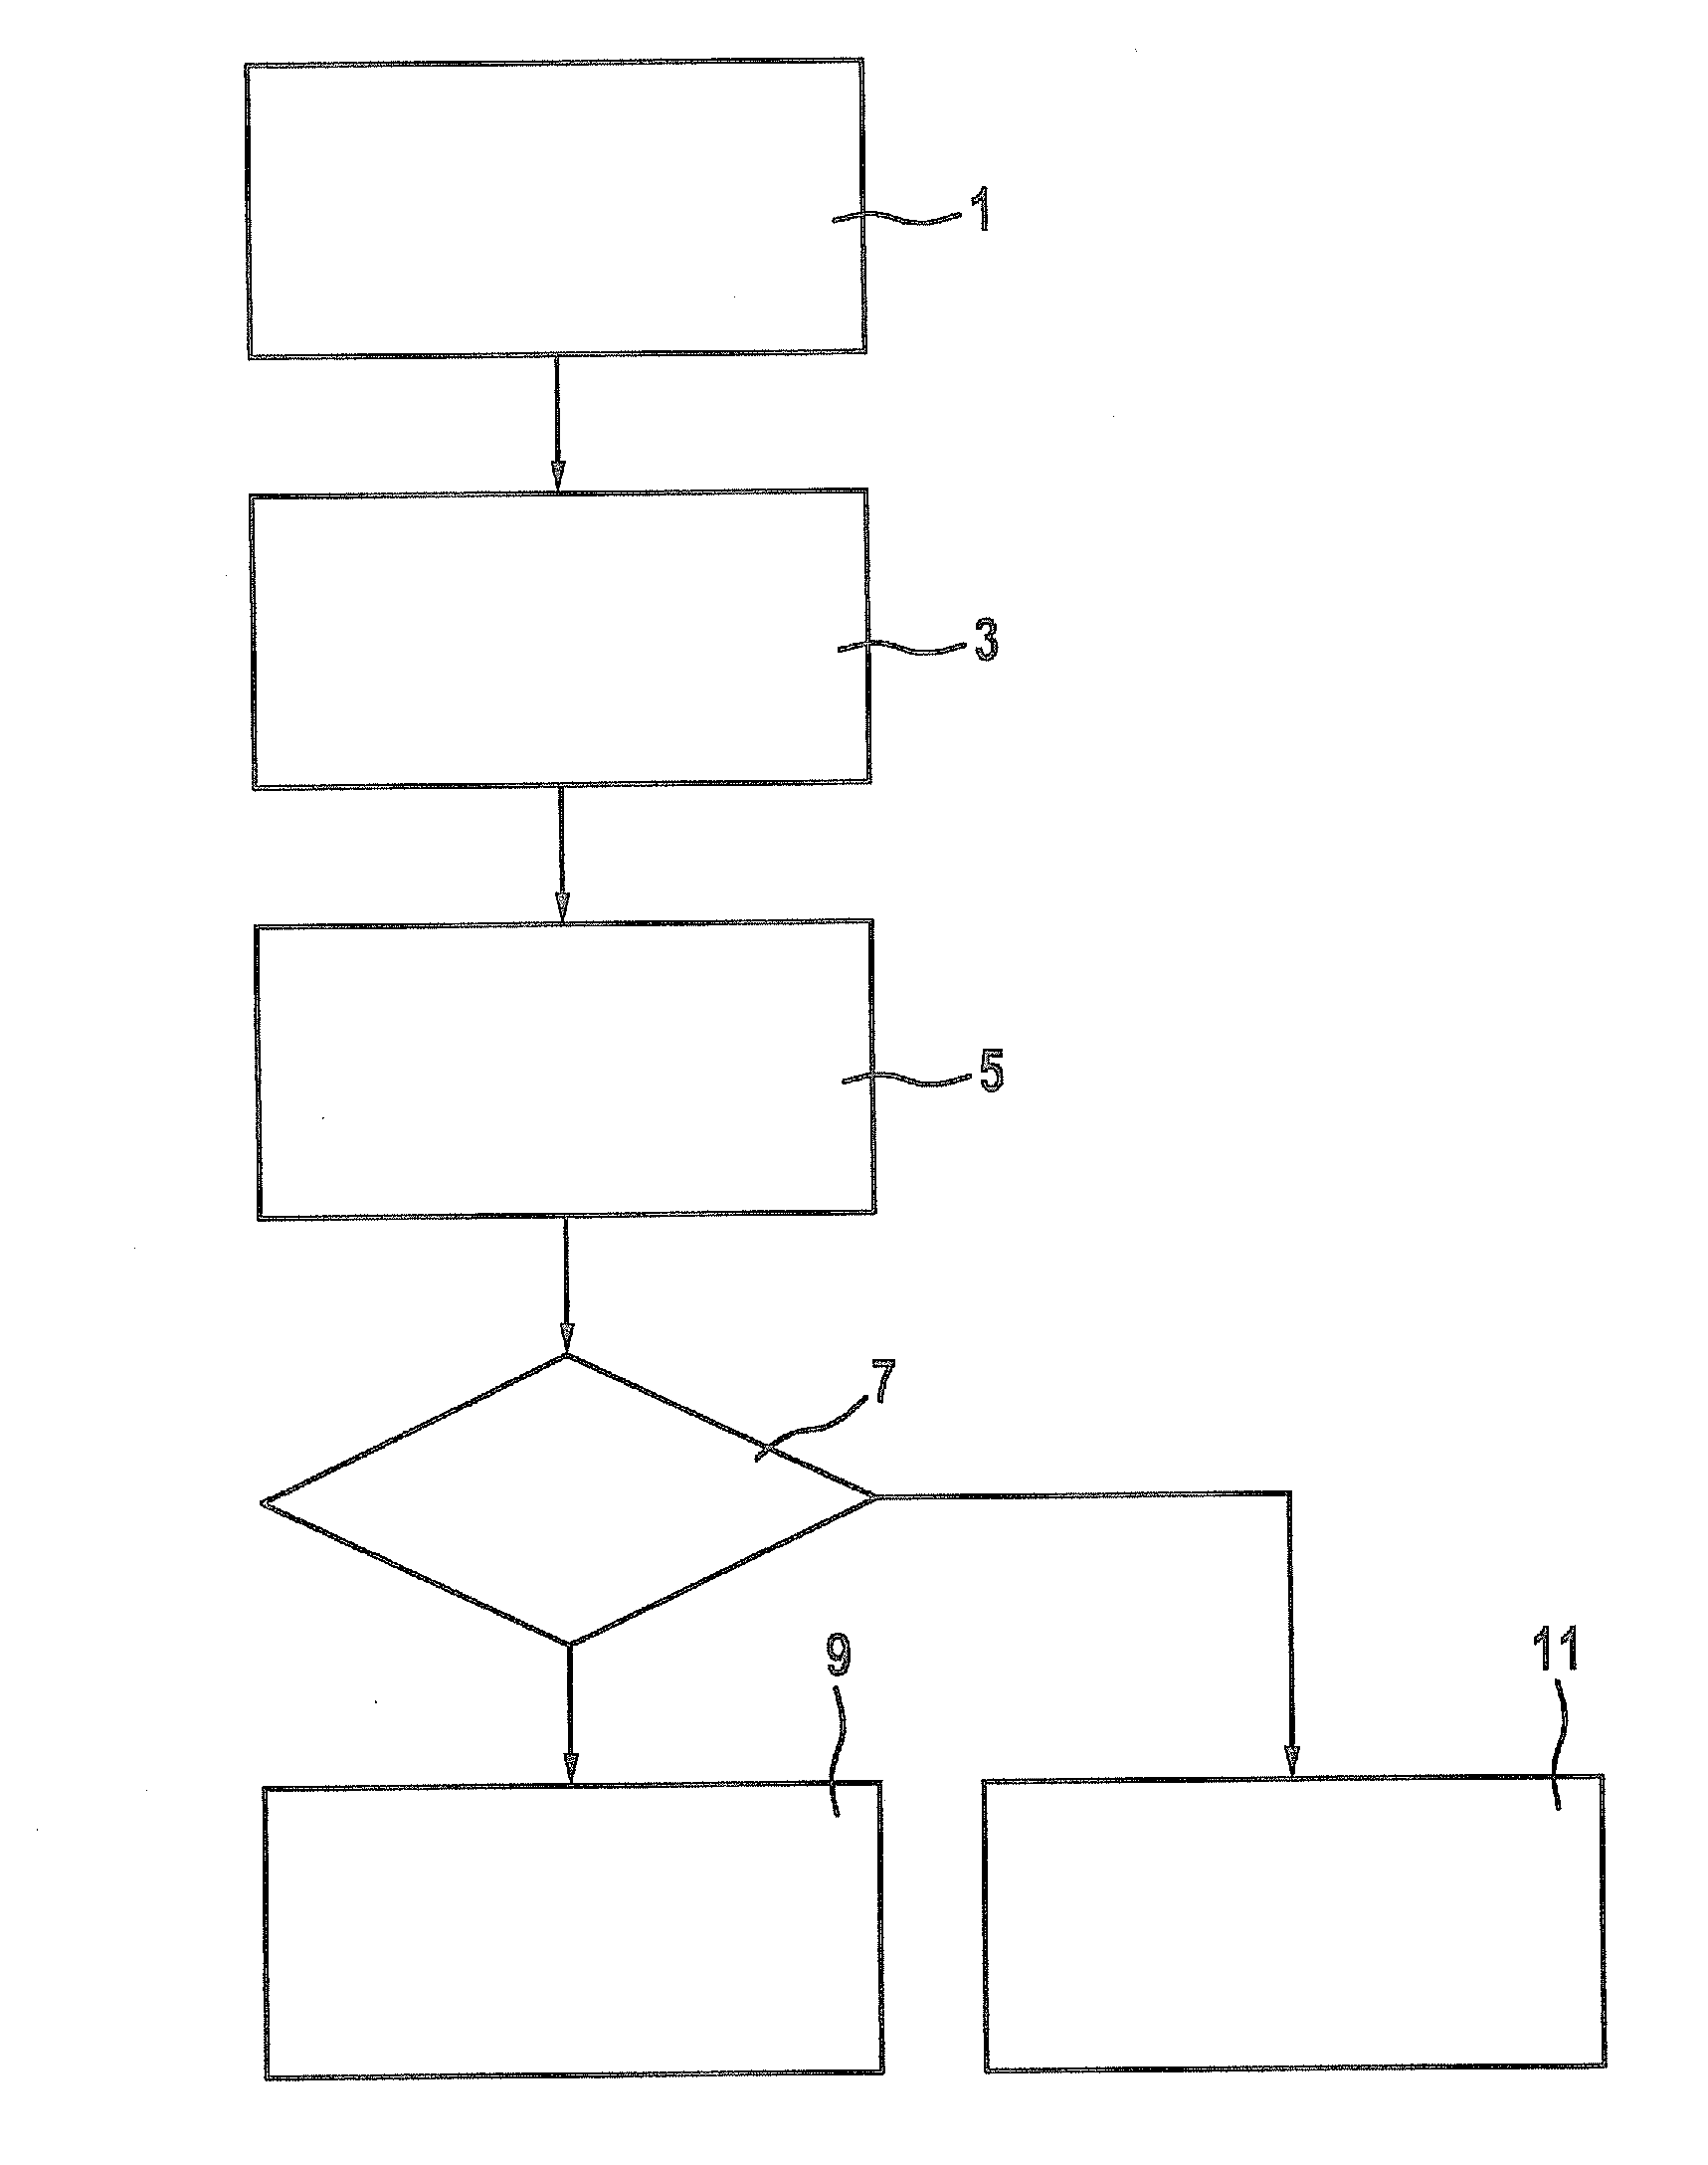 Method for assisting a driver of a motor vehicle